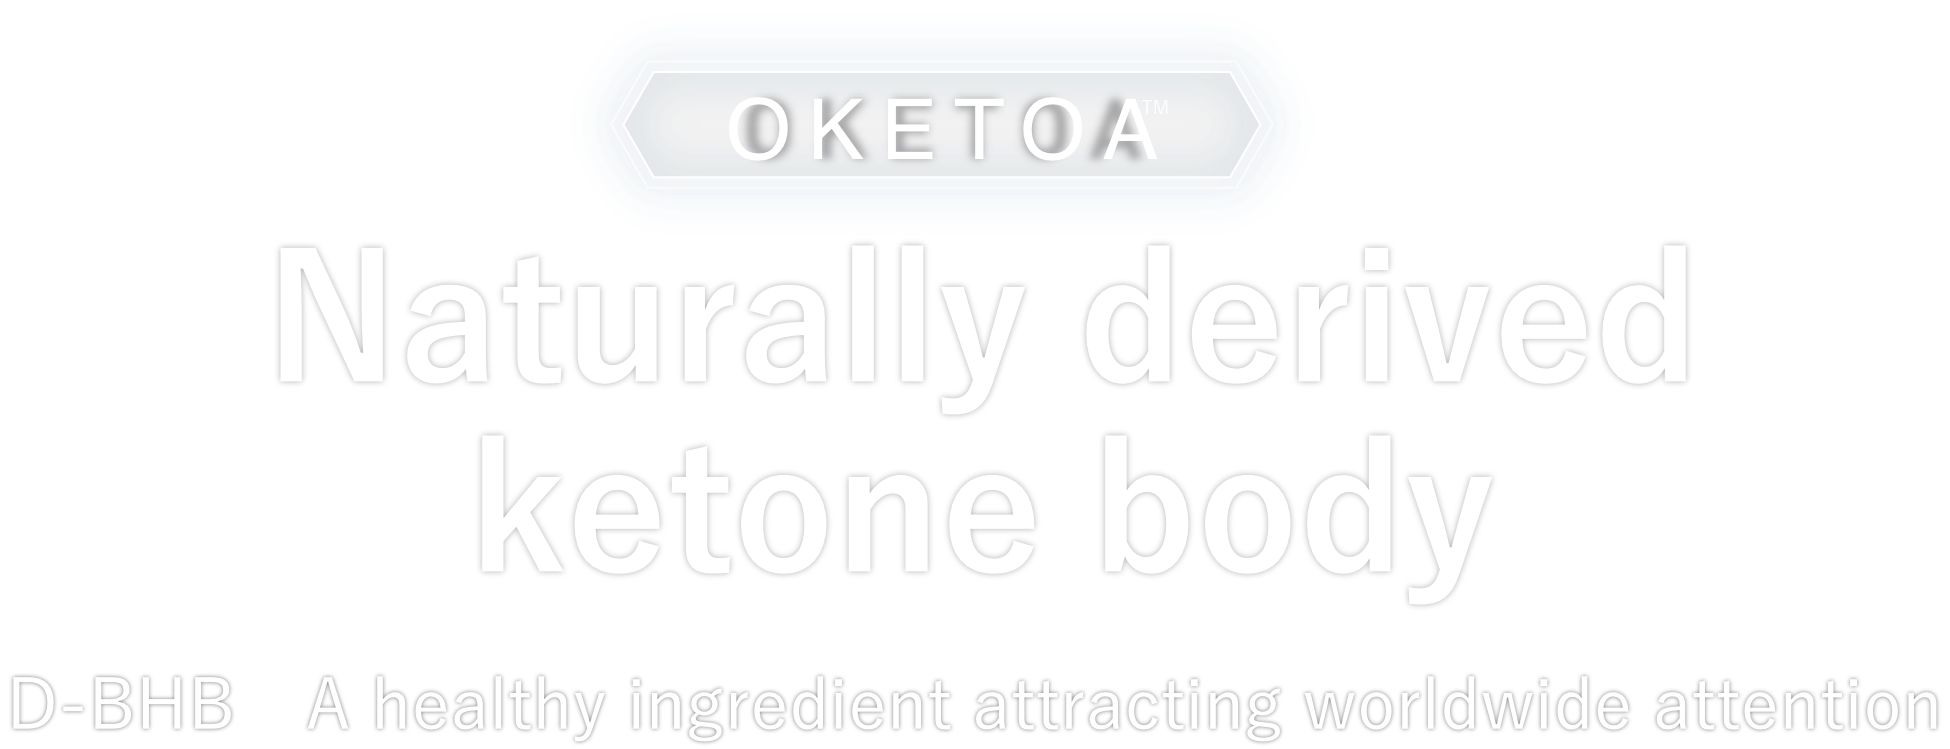 OKETOA™ Naturally derived ketone body D-BHB A healthy ingredient attracting worldwide attention